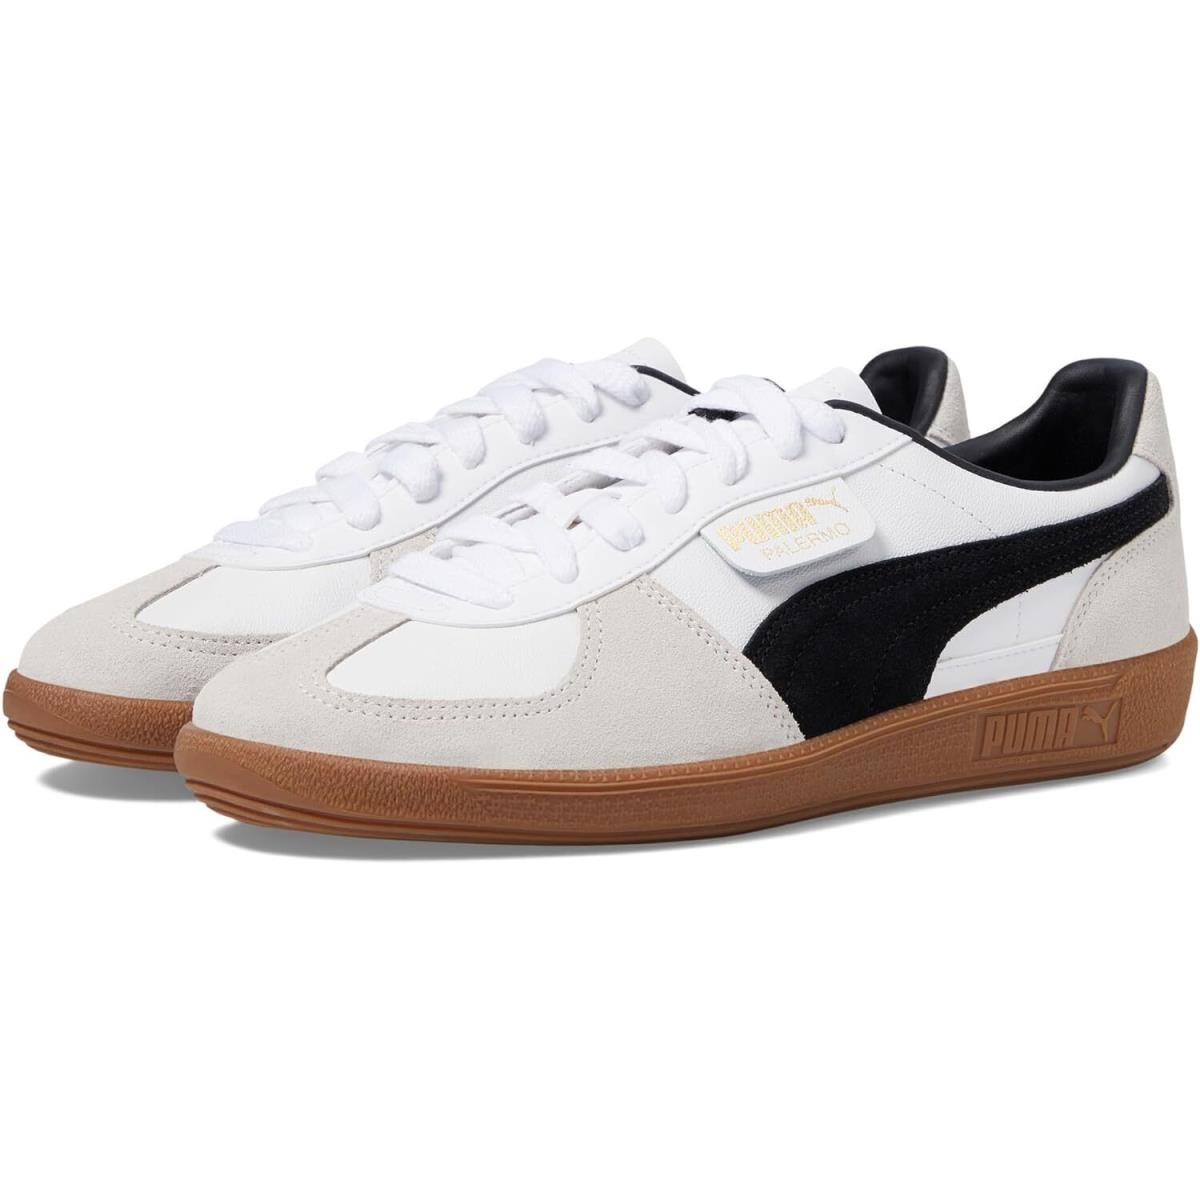 Men`s Shoes Puma Palermo Leather Casual Lace Up Sneakers 39646401 White / Gray